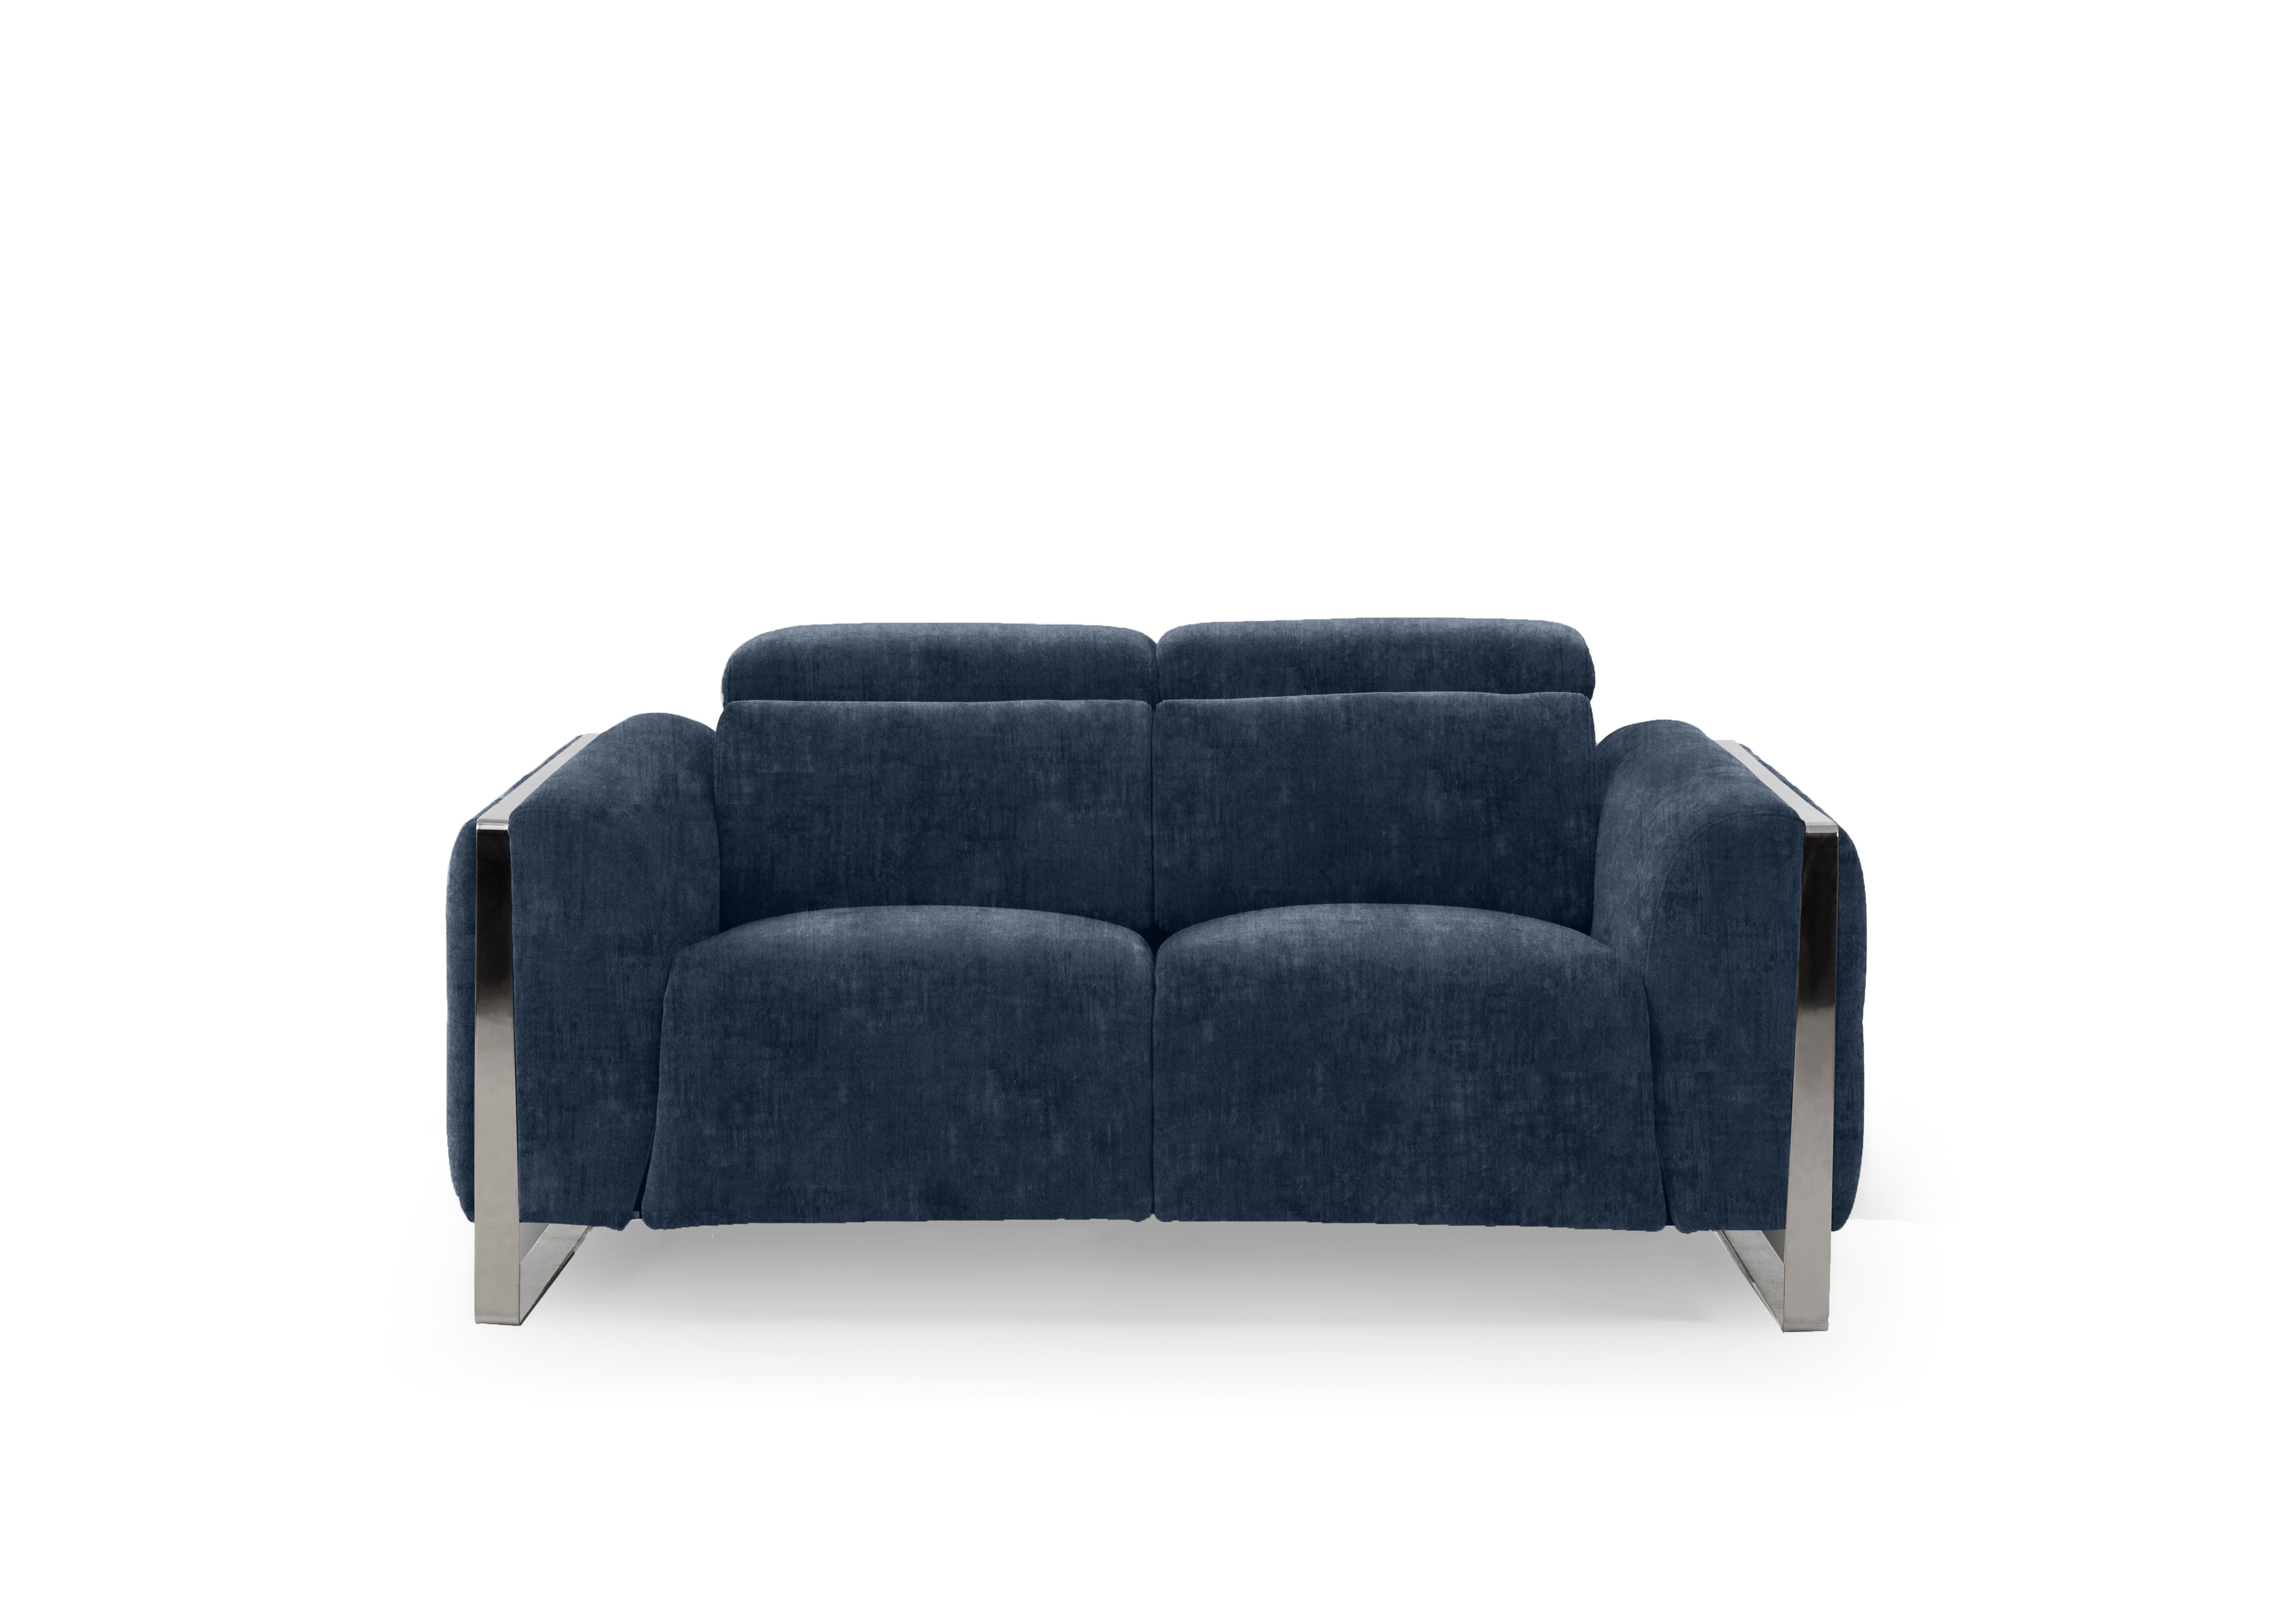 Gisella Fabric 2 Seater Sofa in Heritage Airforce 52000 on Furniture Village